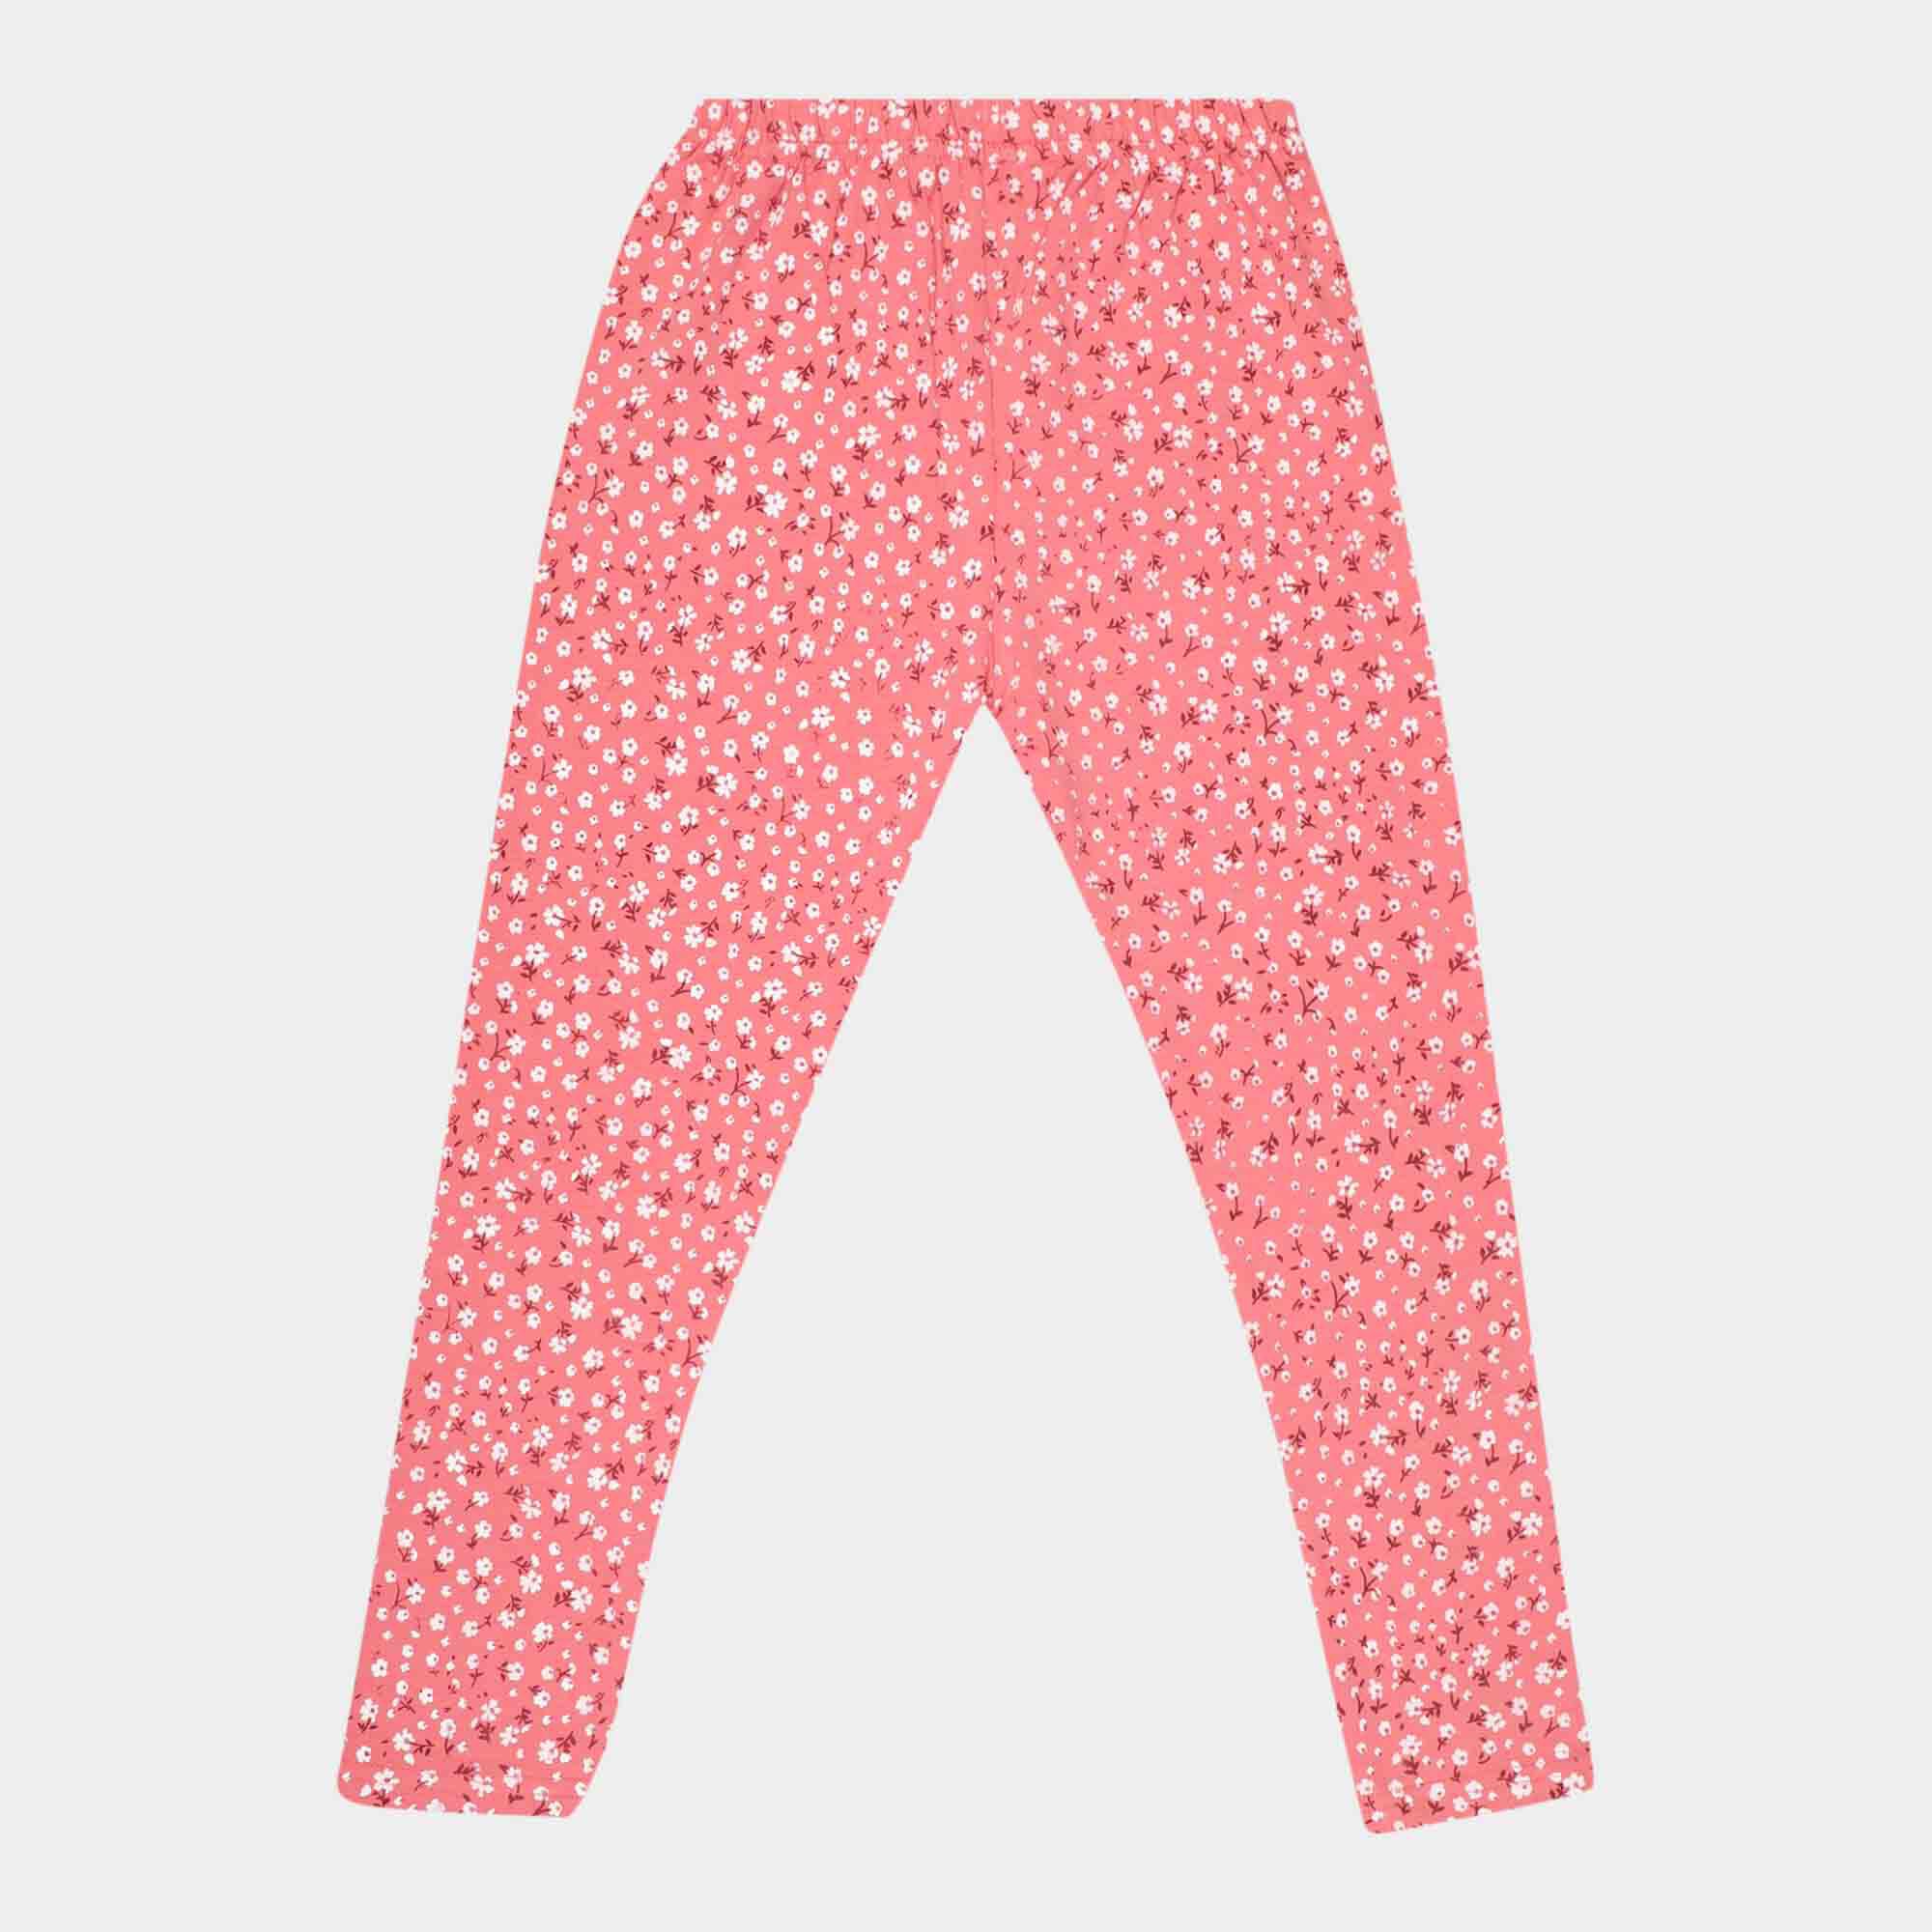 Shop Doodle Printed Leggings | Girls Apparel & Activewear by Limeapple